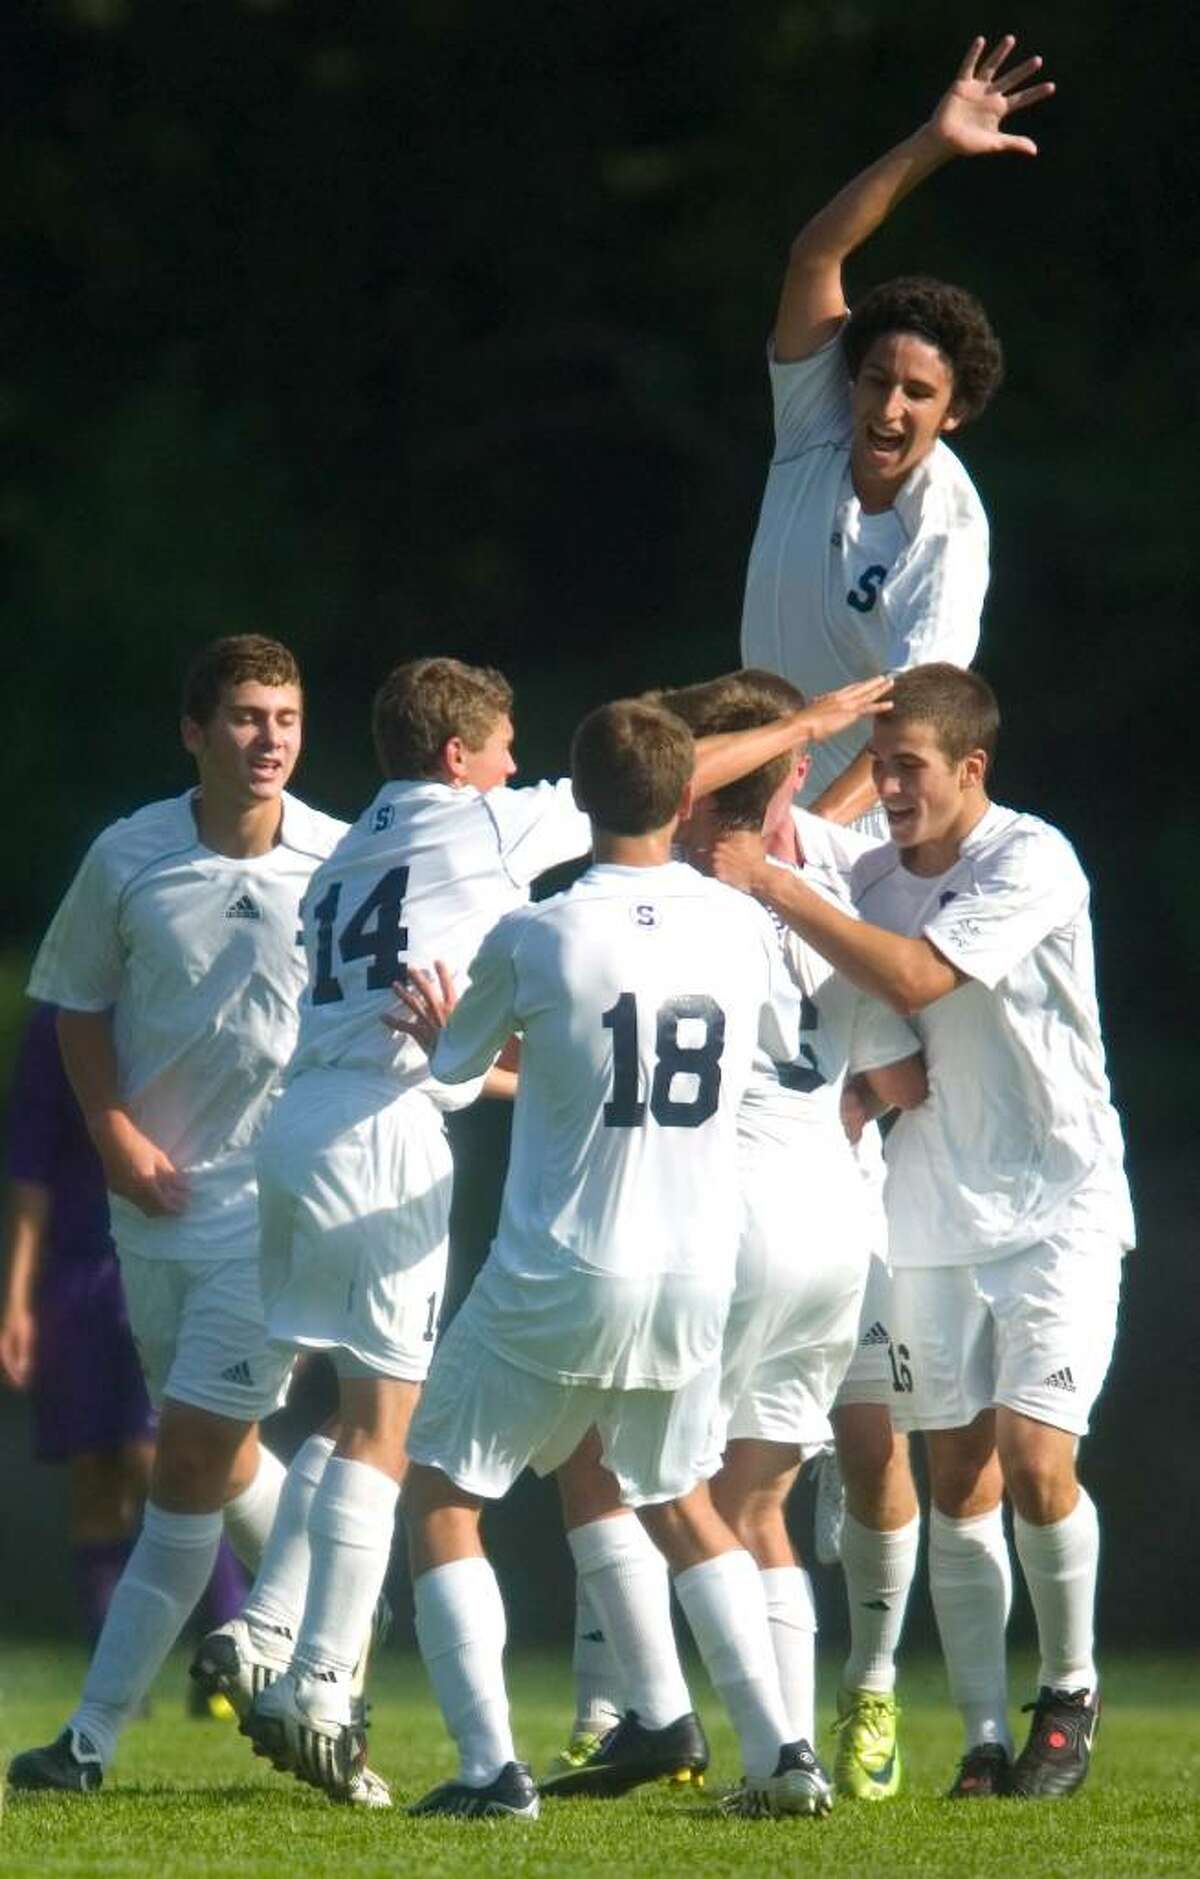 Staples High School players, including Jack Hennessy, top, celebrate after a goal in the first half of an FCIAC soccer match versus Westhill High School at Staples High School in Westport, Conn. on Tuesday, Sept. 15, 2009.